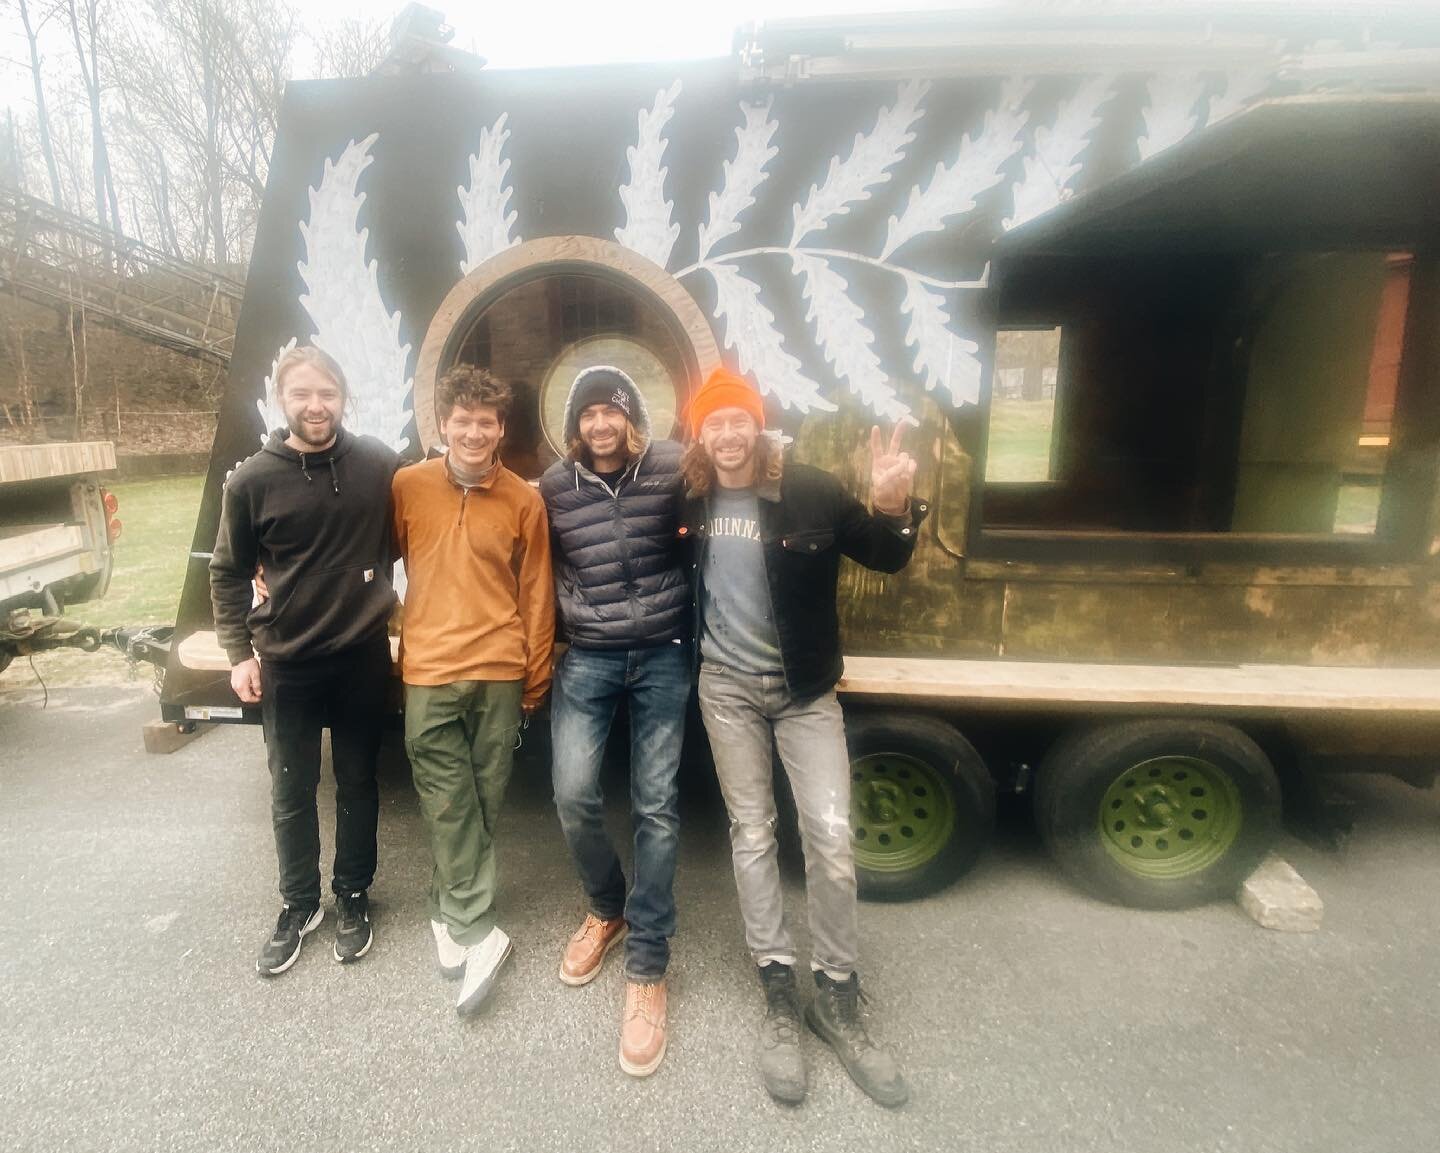 My guys right here!!!! May I officially present to you.... 🥁 
The Drifting Studio!
It&rsquo;s a mobile art studio made in collaborationwith @massmoca @kidspacemm and we&rsquo;ll use to do art programming with the Department of Children and Families 